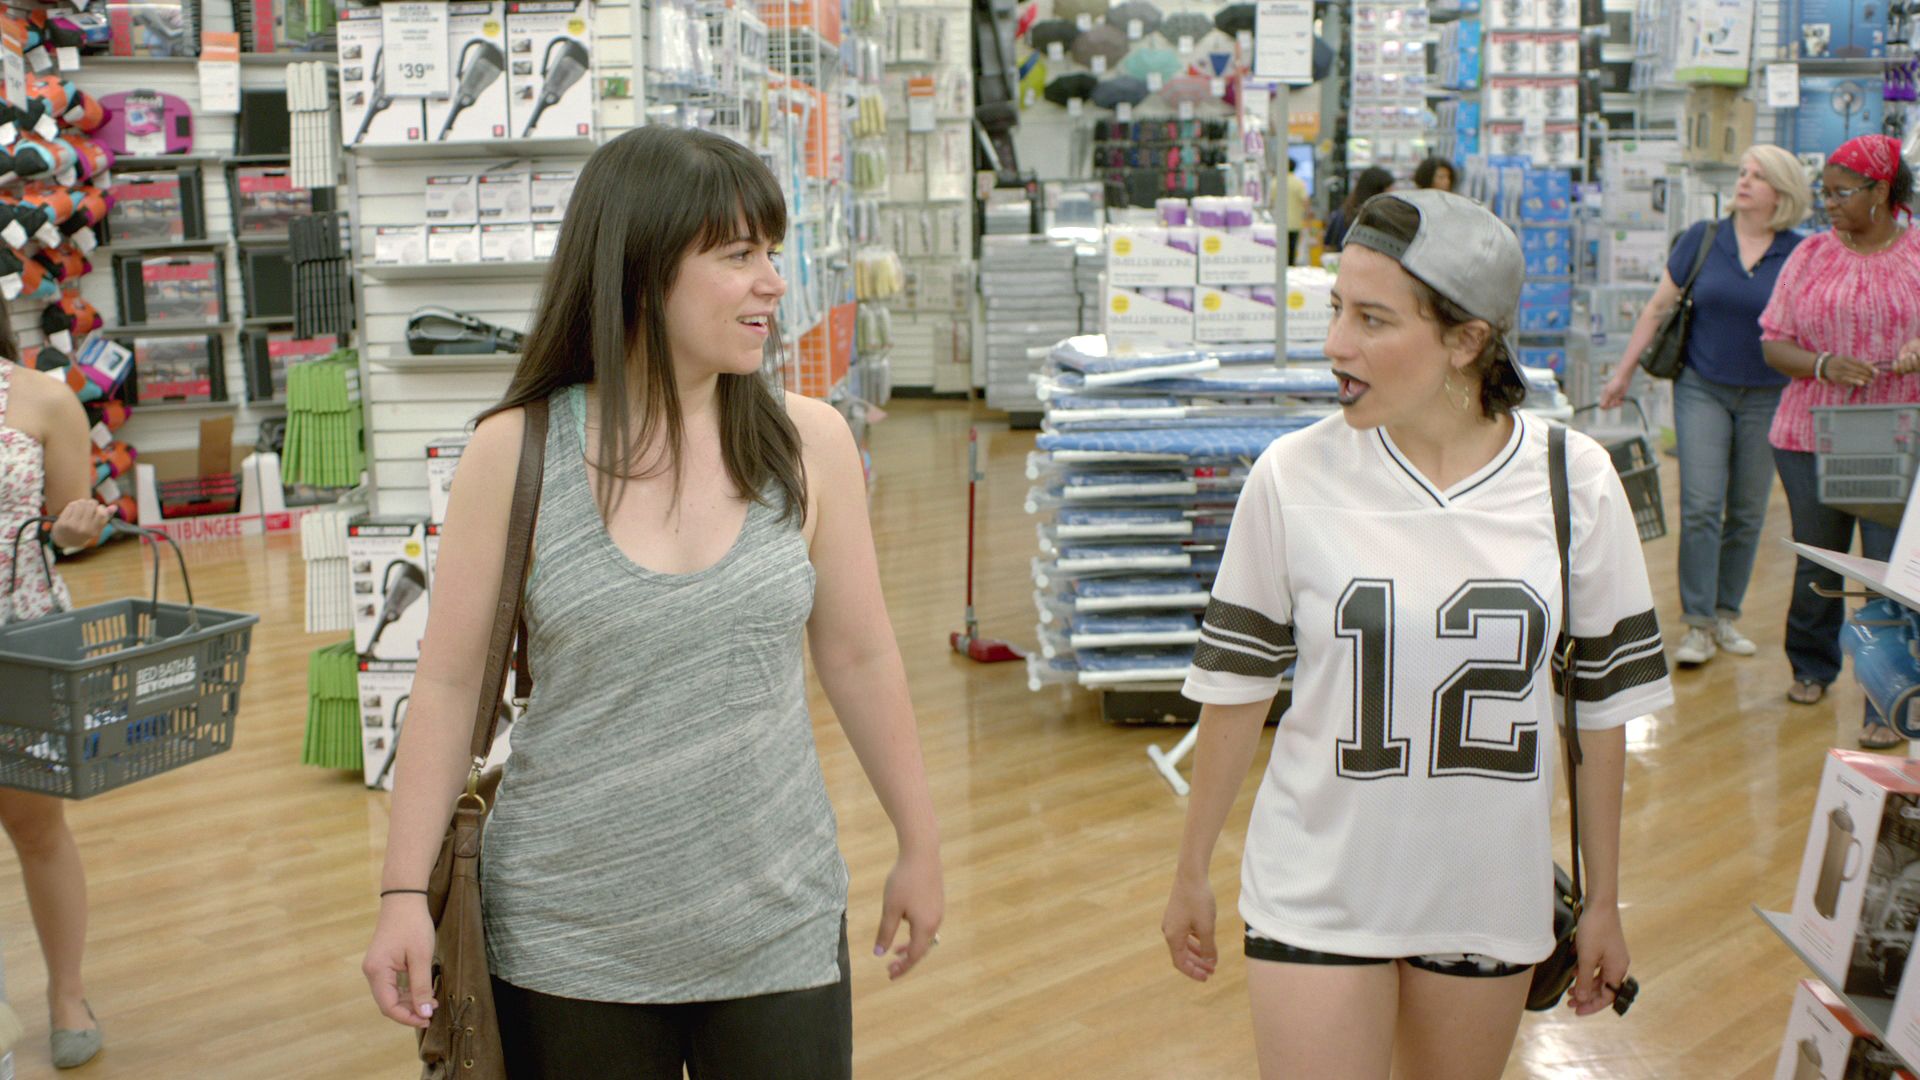 A Thank You To 'Broad City' For Getting Me Through My Twenties